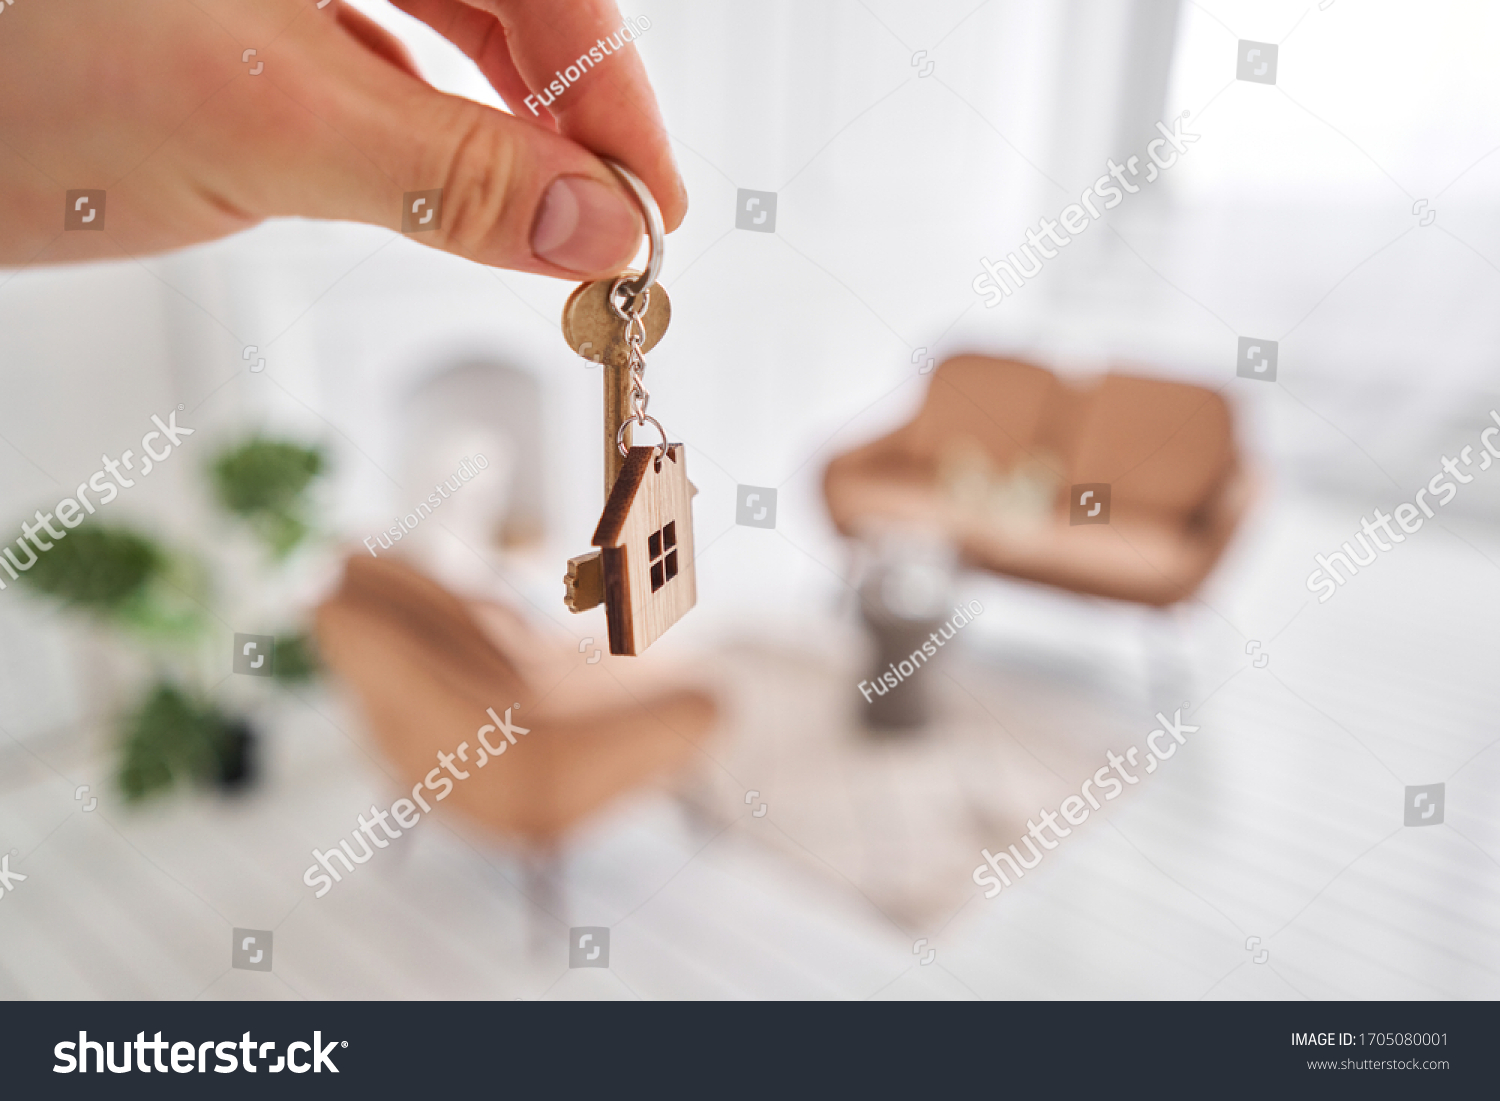 Men hand holding key with house shaped keychain. Modern light lobby interior. Mortgage concept. Real estate, moving home or renting property. #1705080001